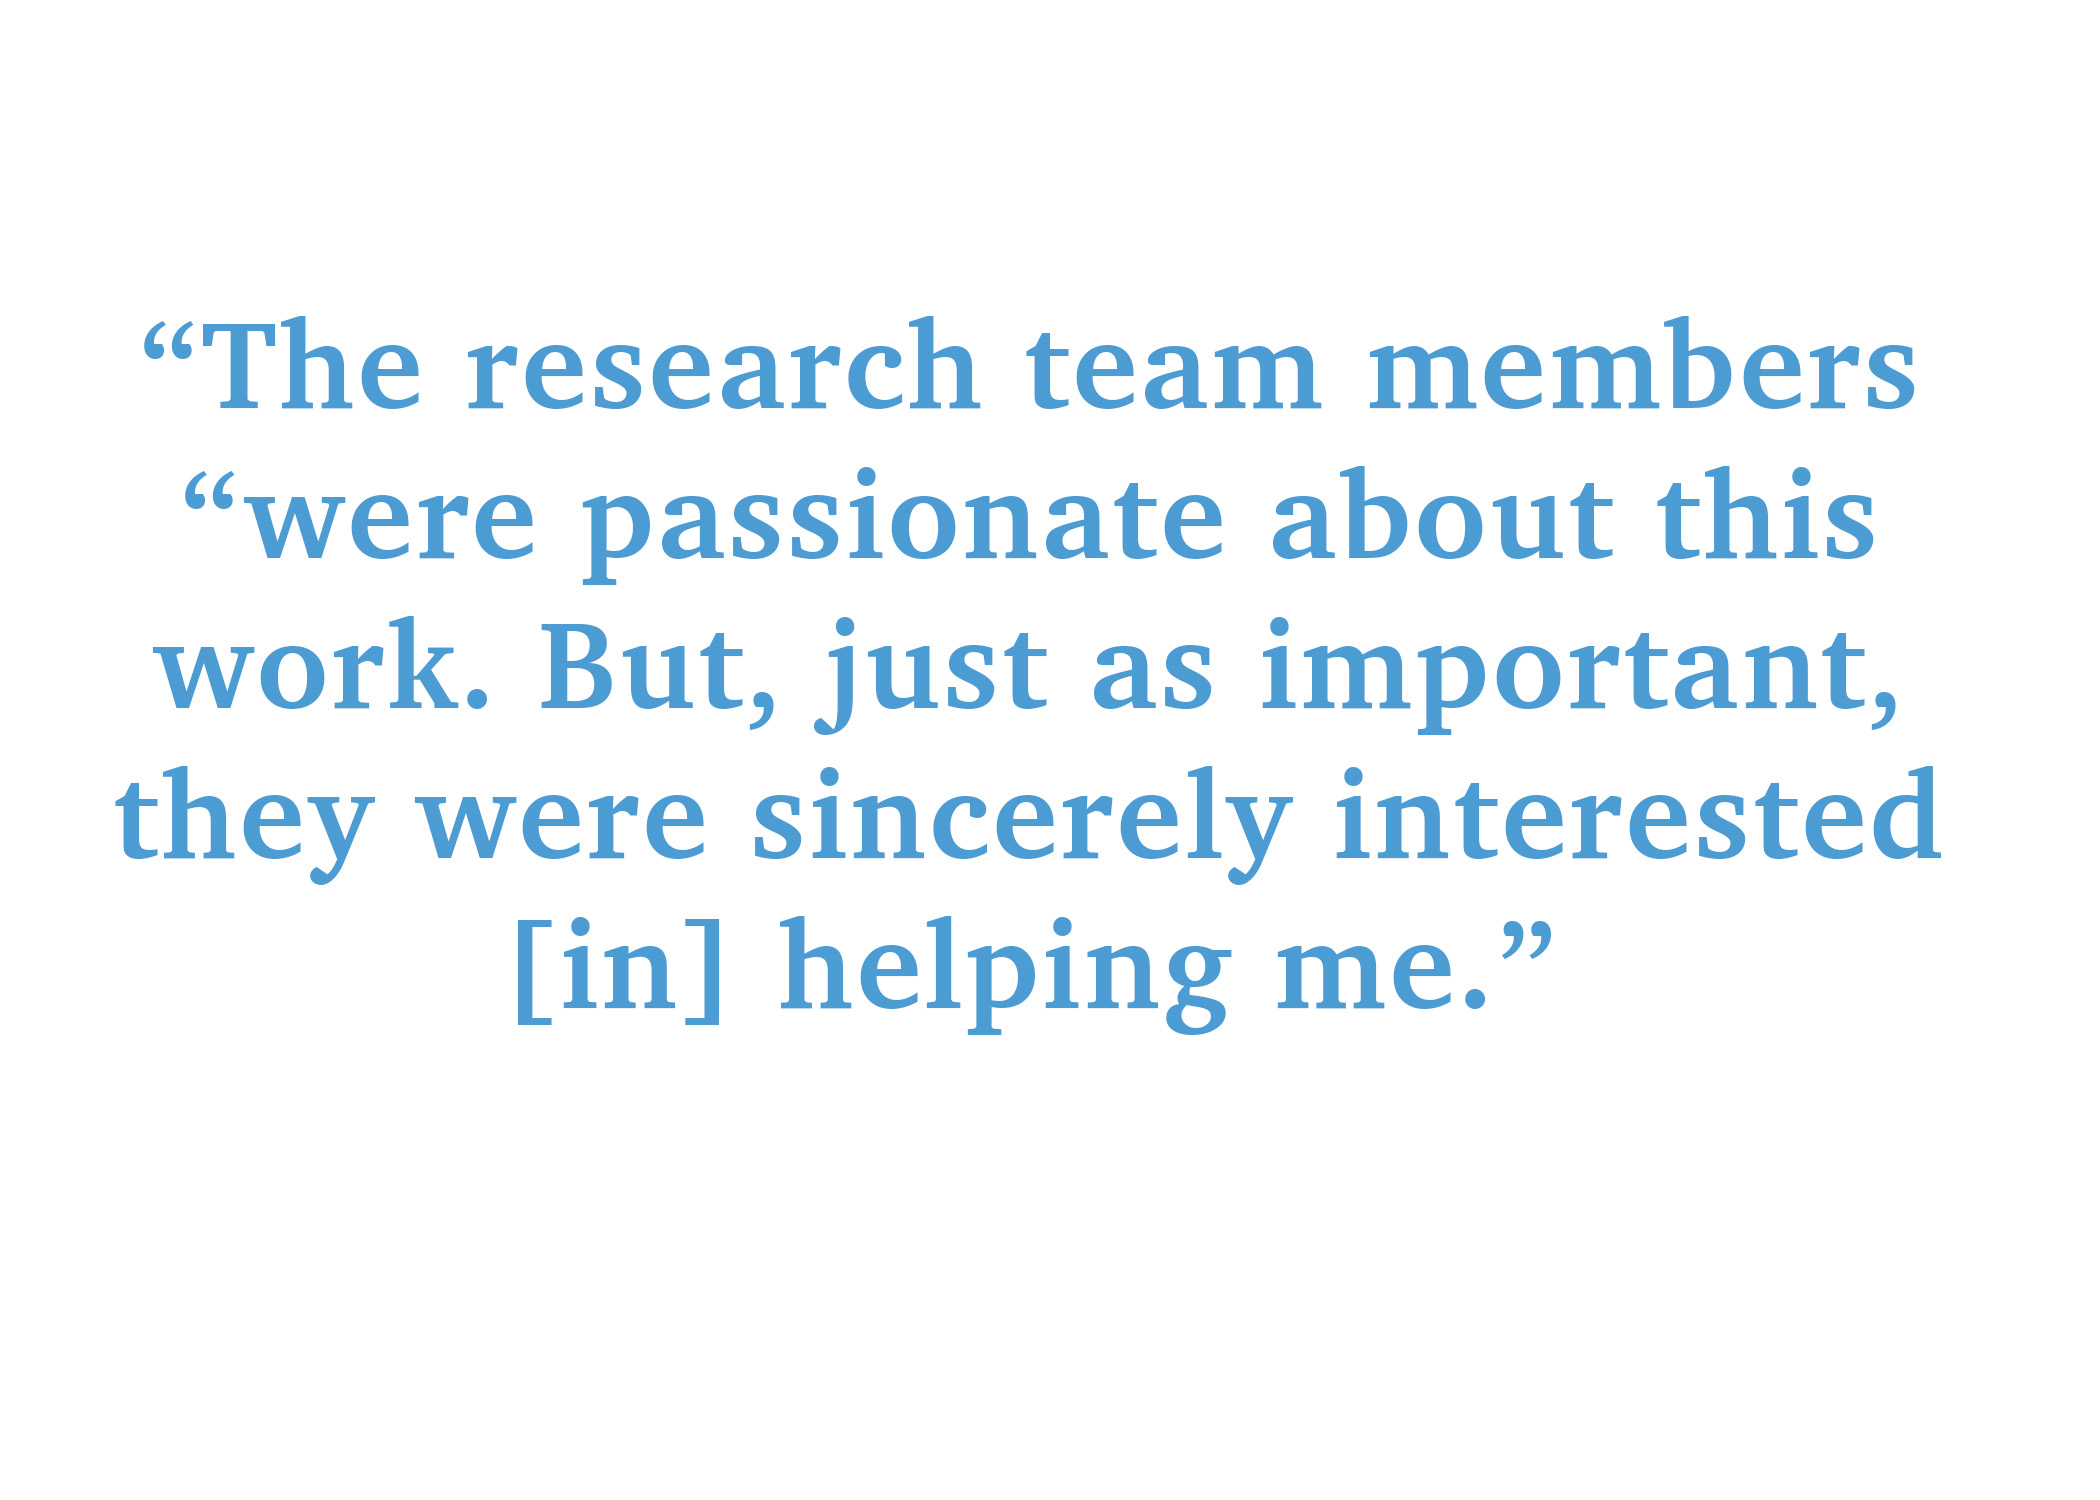 The research team members were passionate about this work. But just as important, they were sincerely interested in helping me.